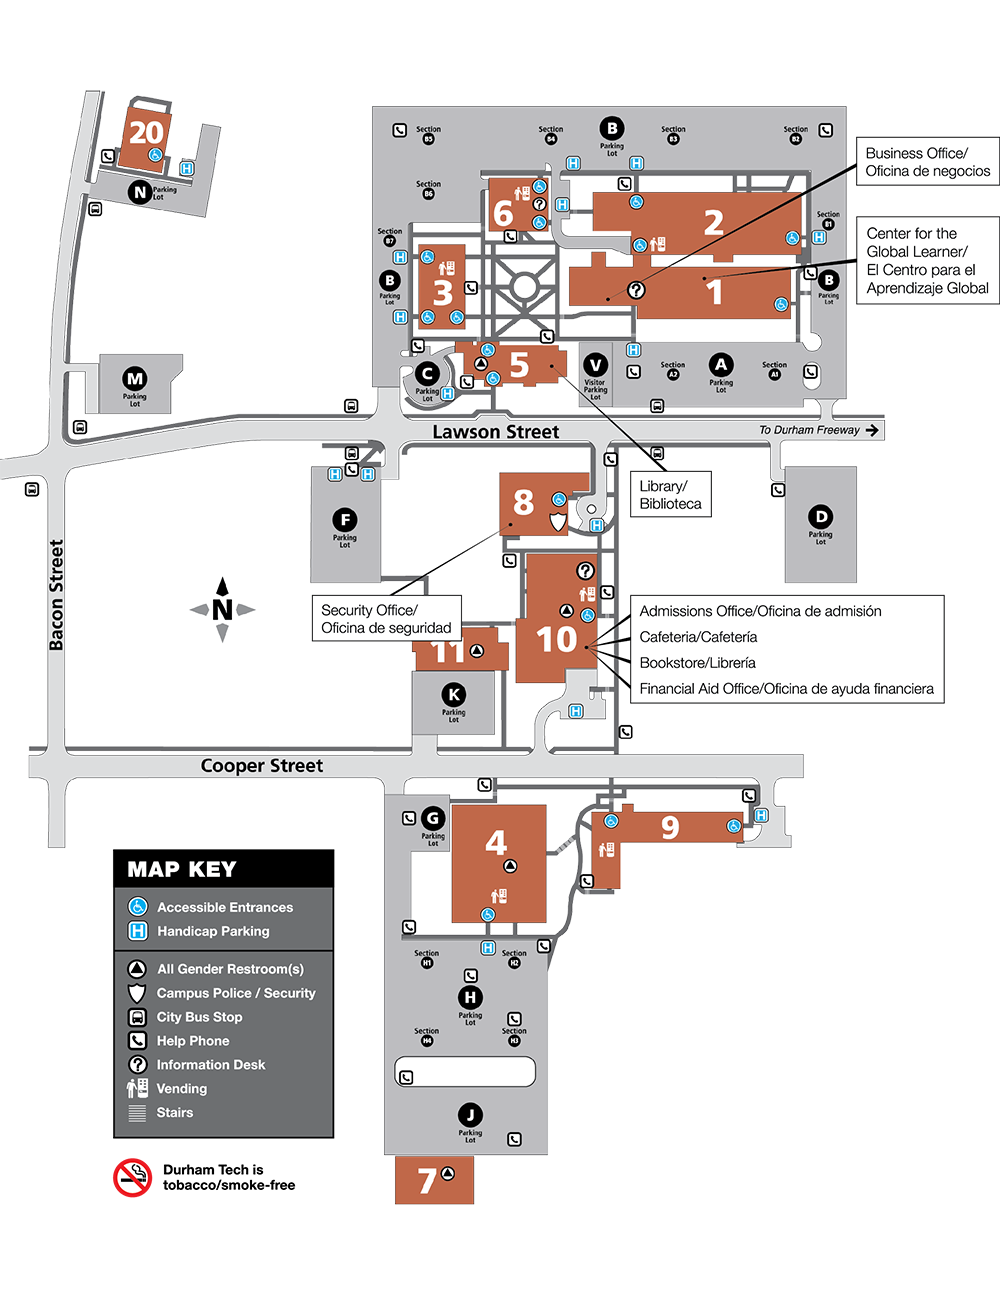 Durham Tech Main Campus Map. Department locations by building are listed on the webpage below the image